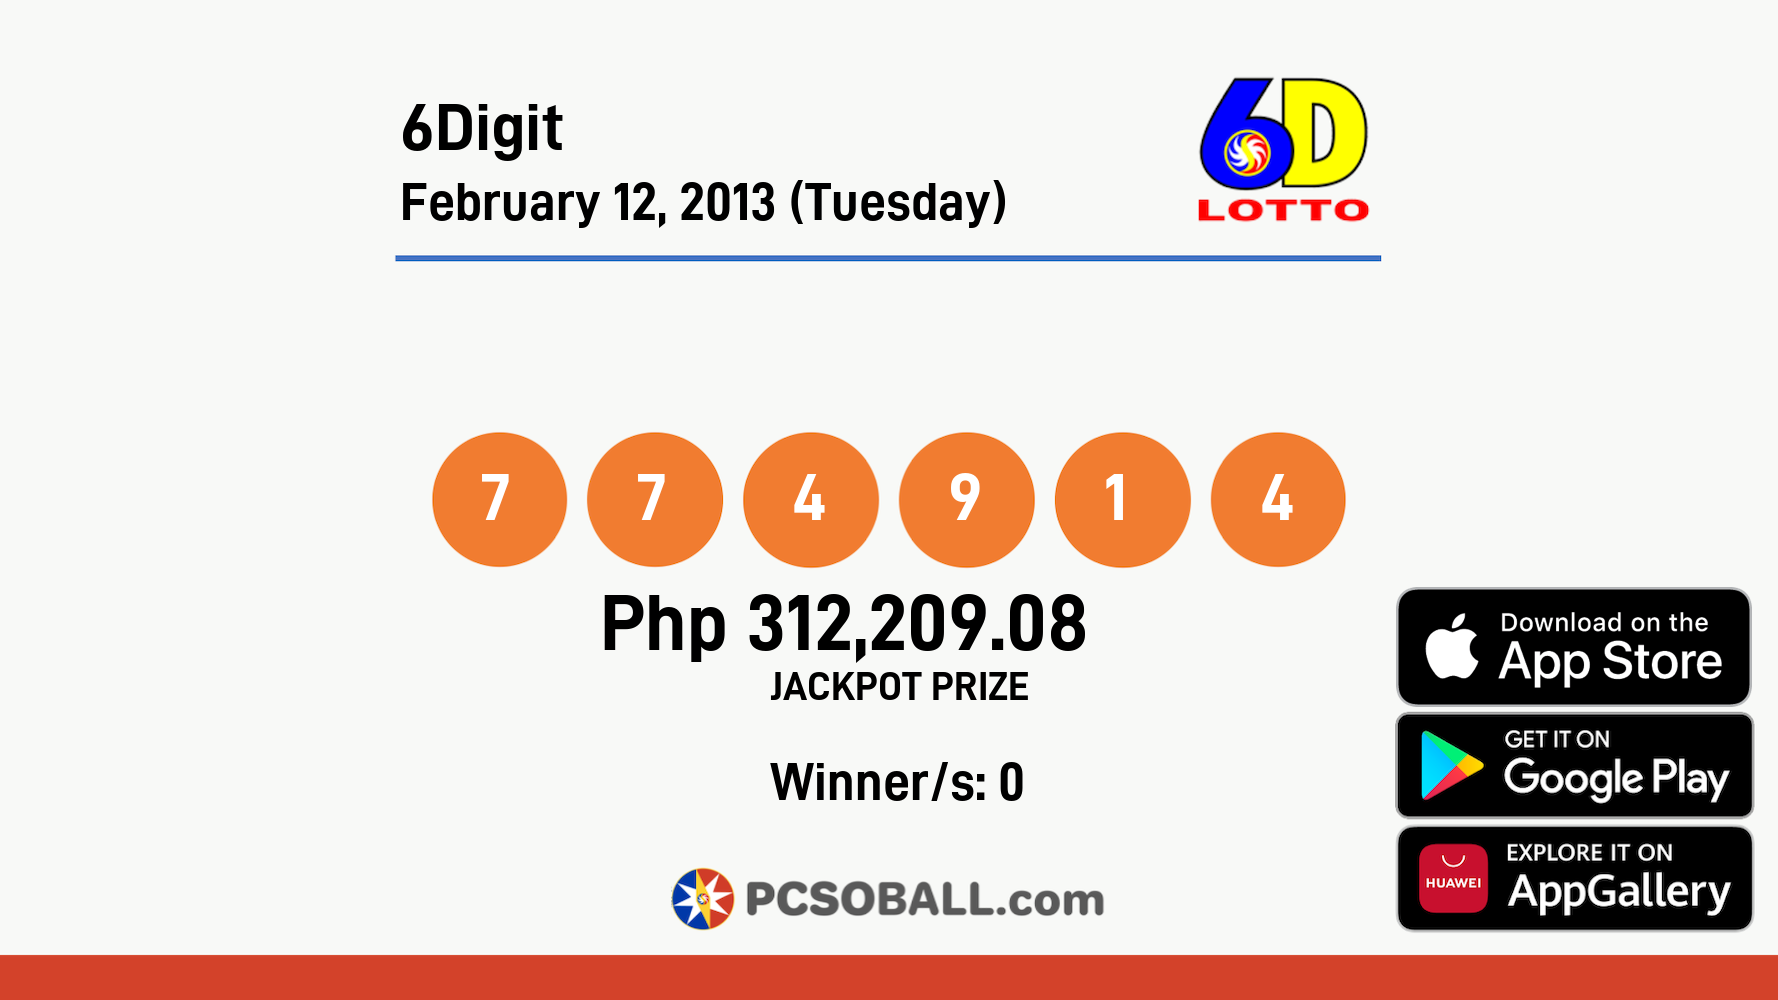 6Digit February 12, 2013 (Tuesday) Result